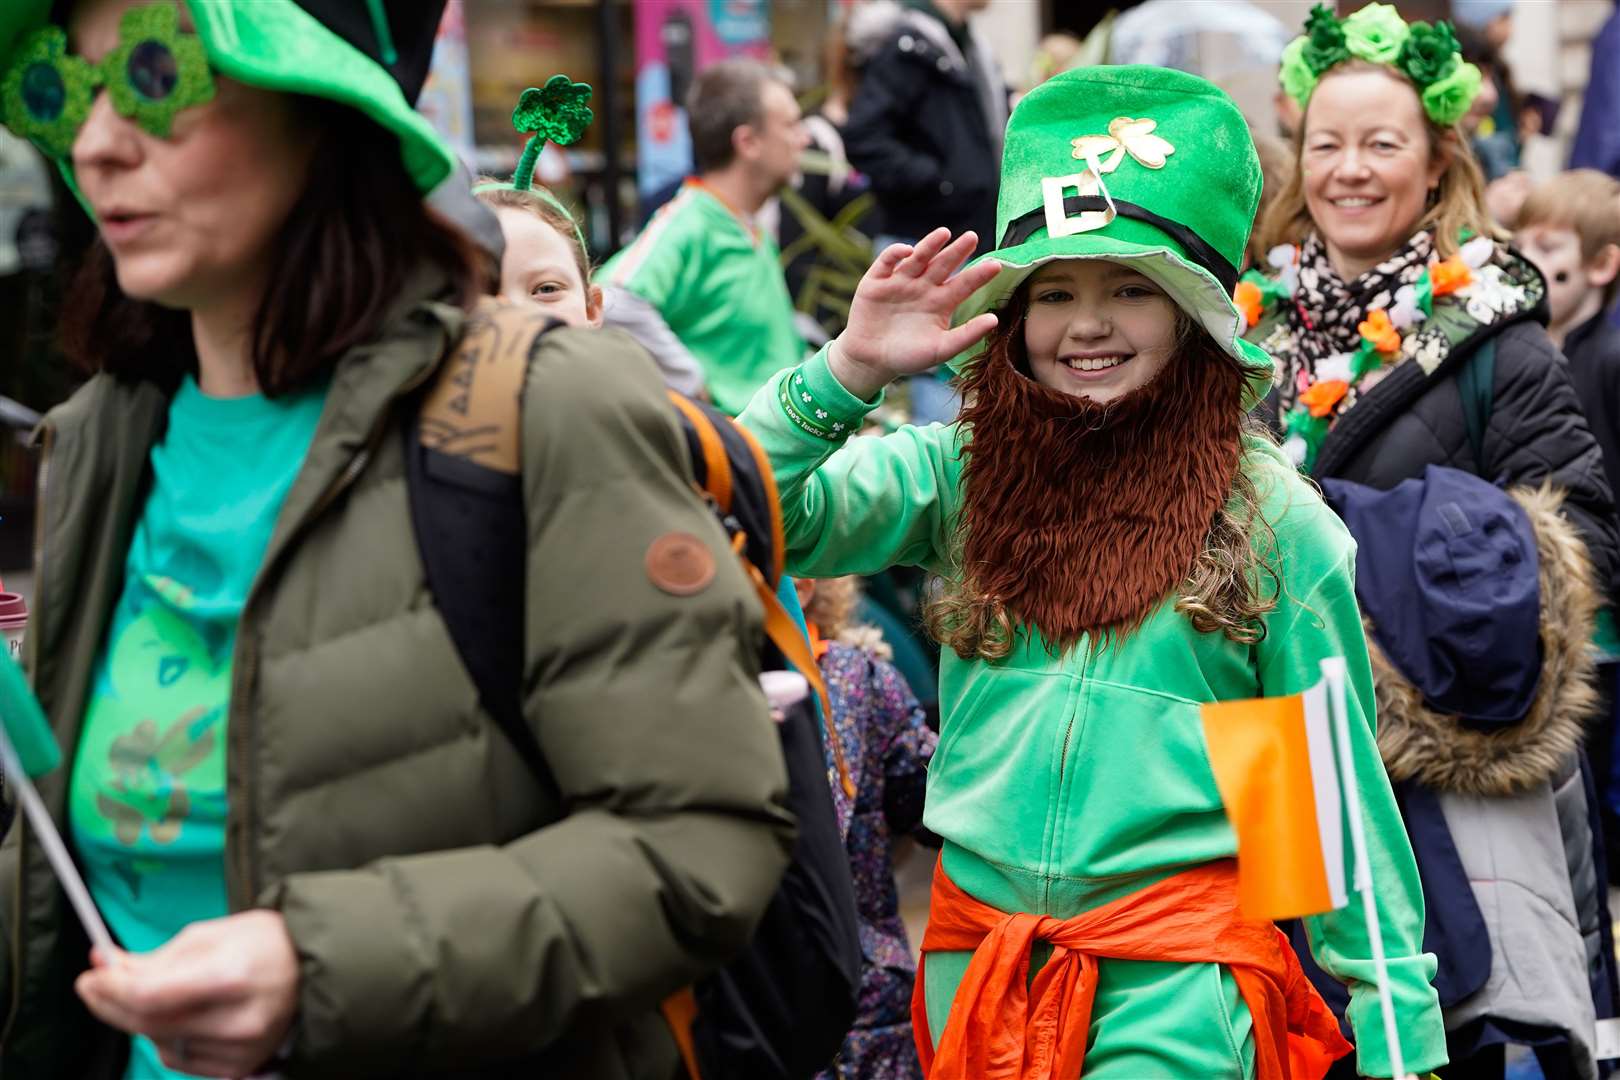 Meanwhile, celebrations continued across the water in London with crowds gathering in Trafalgar Square for the UK capital’s St Patrick’s Day event (Lucy North/PA)